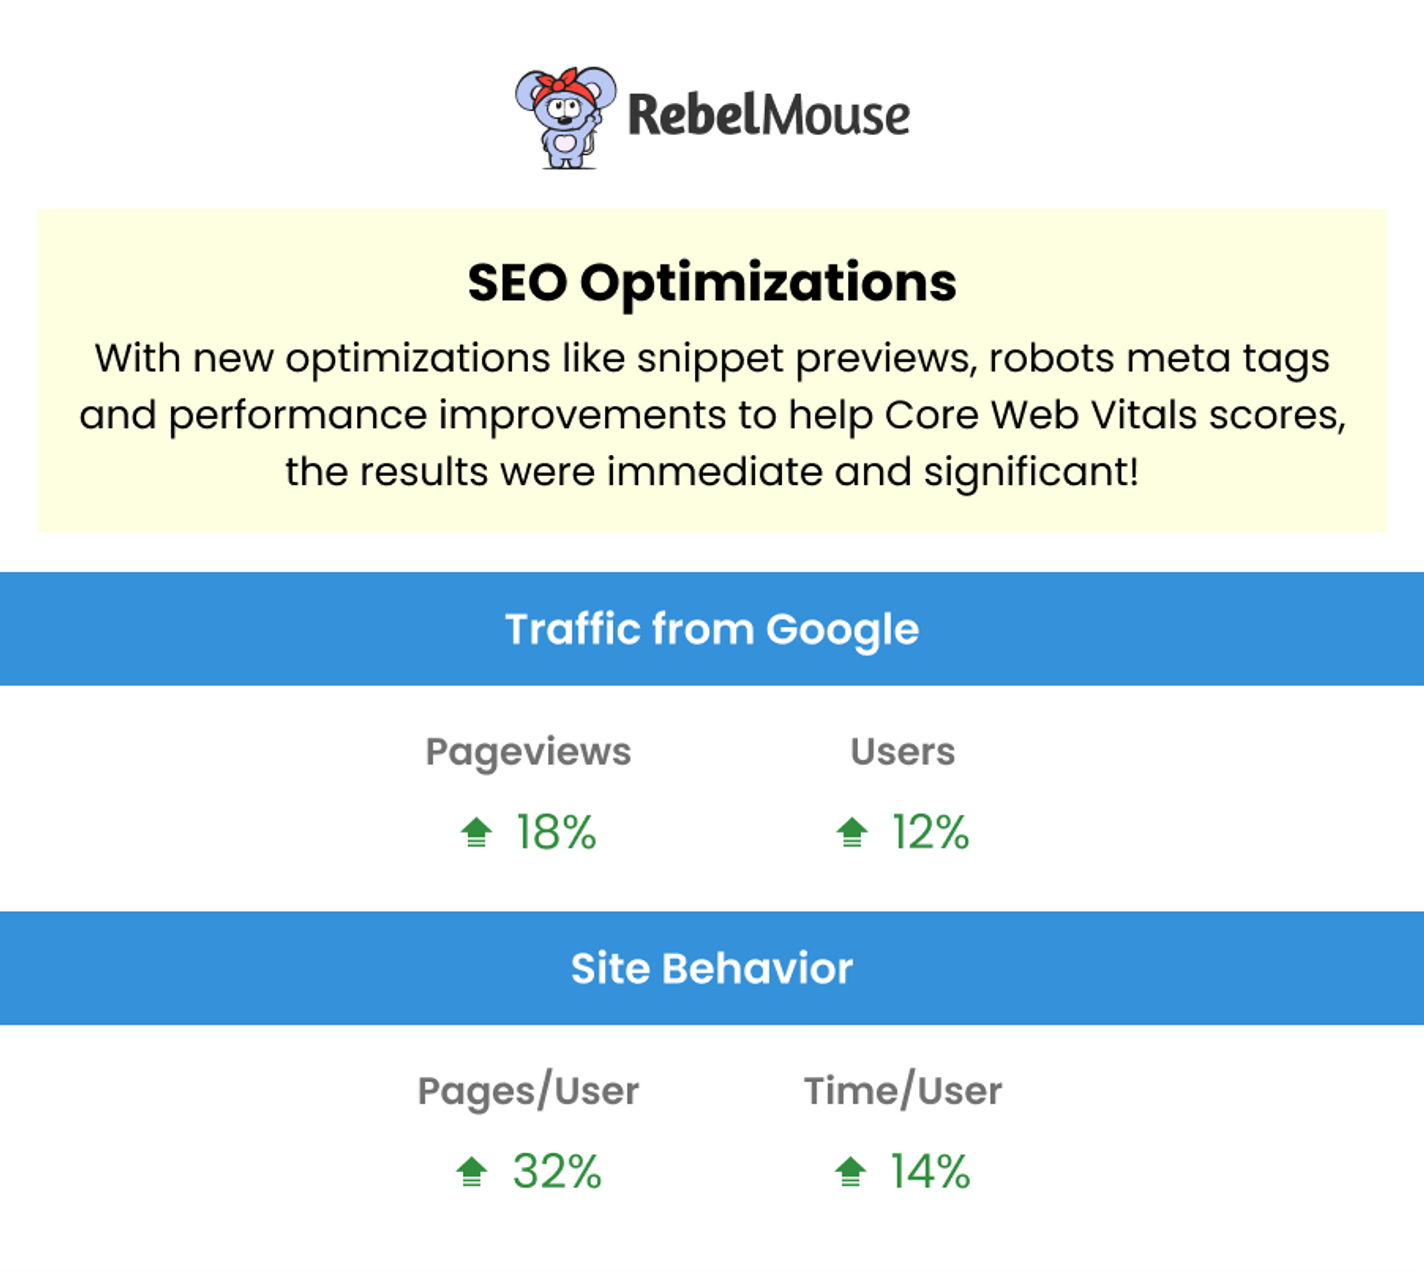 traffic from Google and site behavior increases due to RebelMouse\u2019s SEO optimizations